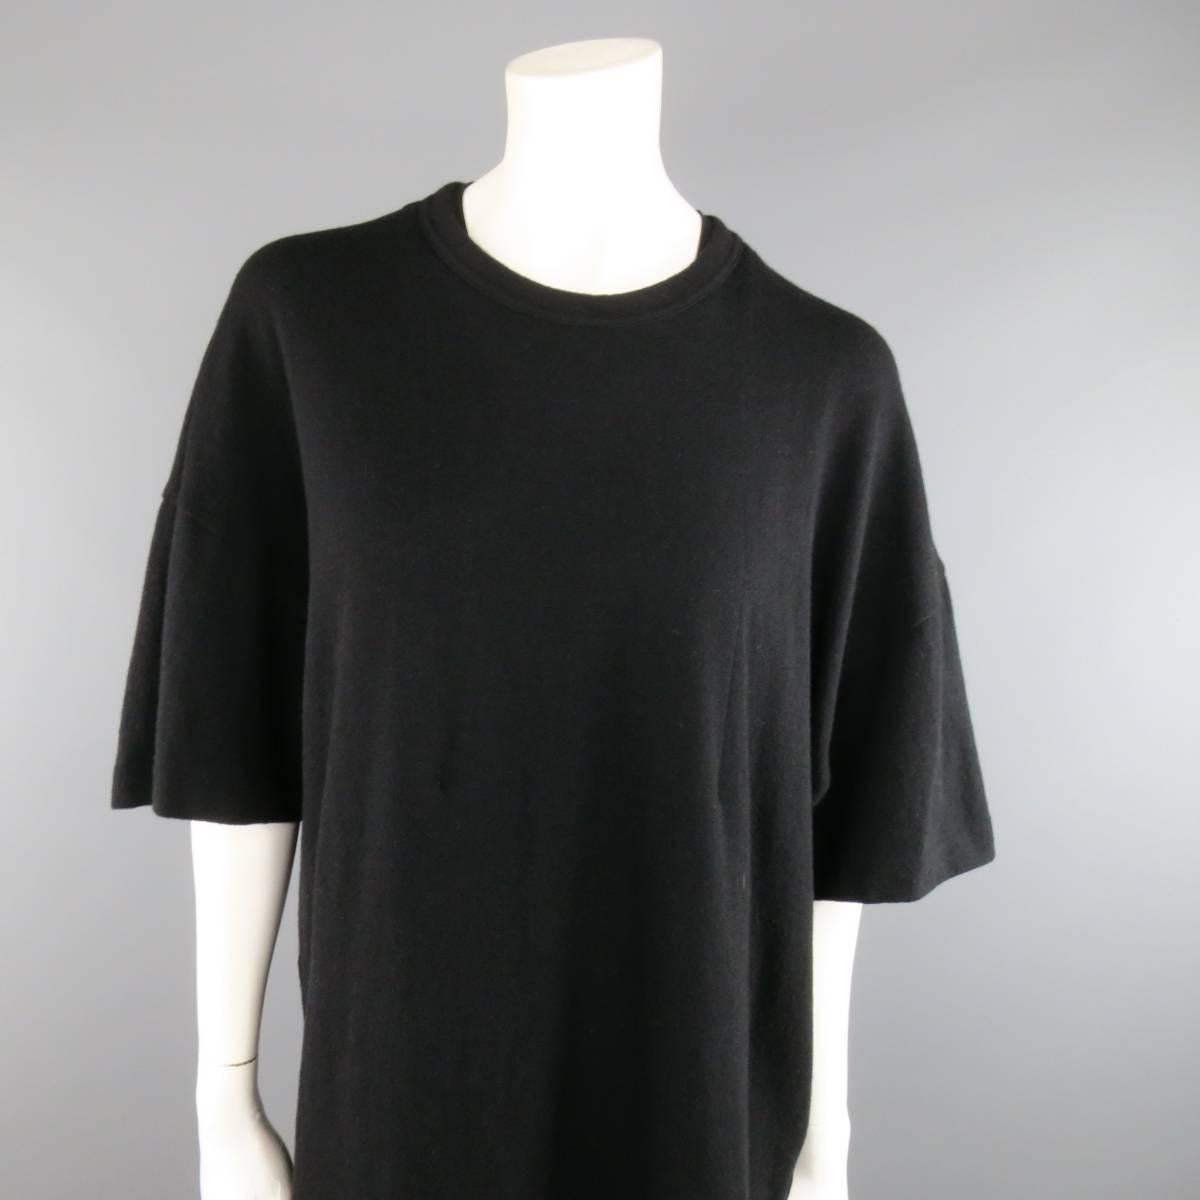 COMME des GARCONS T-Shirt consists of wool blend material in a black color tone. Designed in a double layered, crew-neck collar and short sleeve cuffs. Oversize style with an elongated underlay in a see-through polyester fabric.  Made in